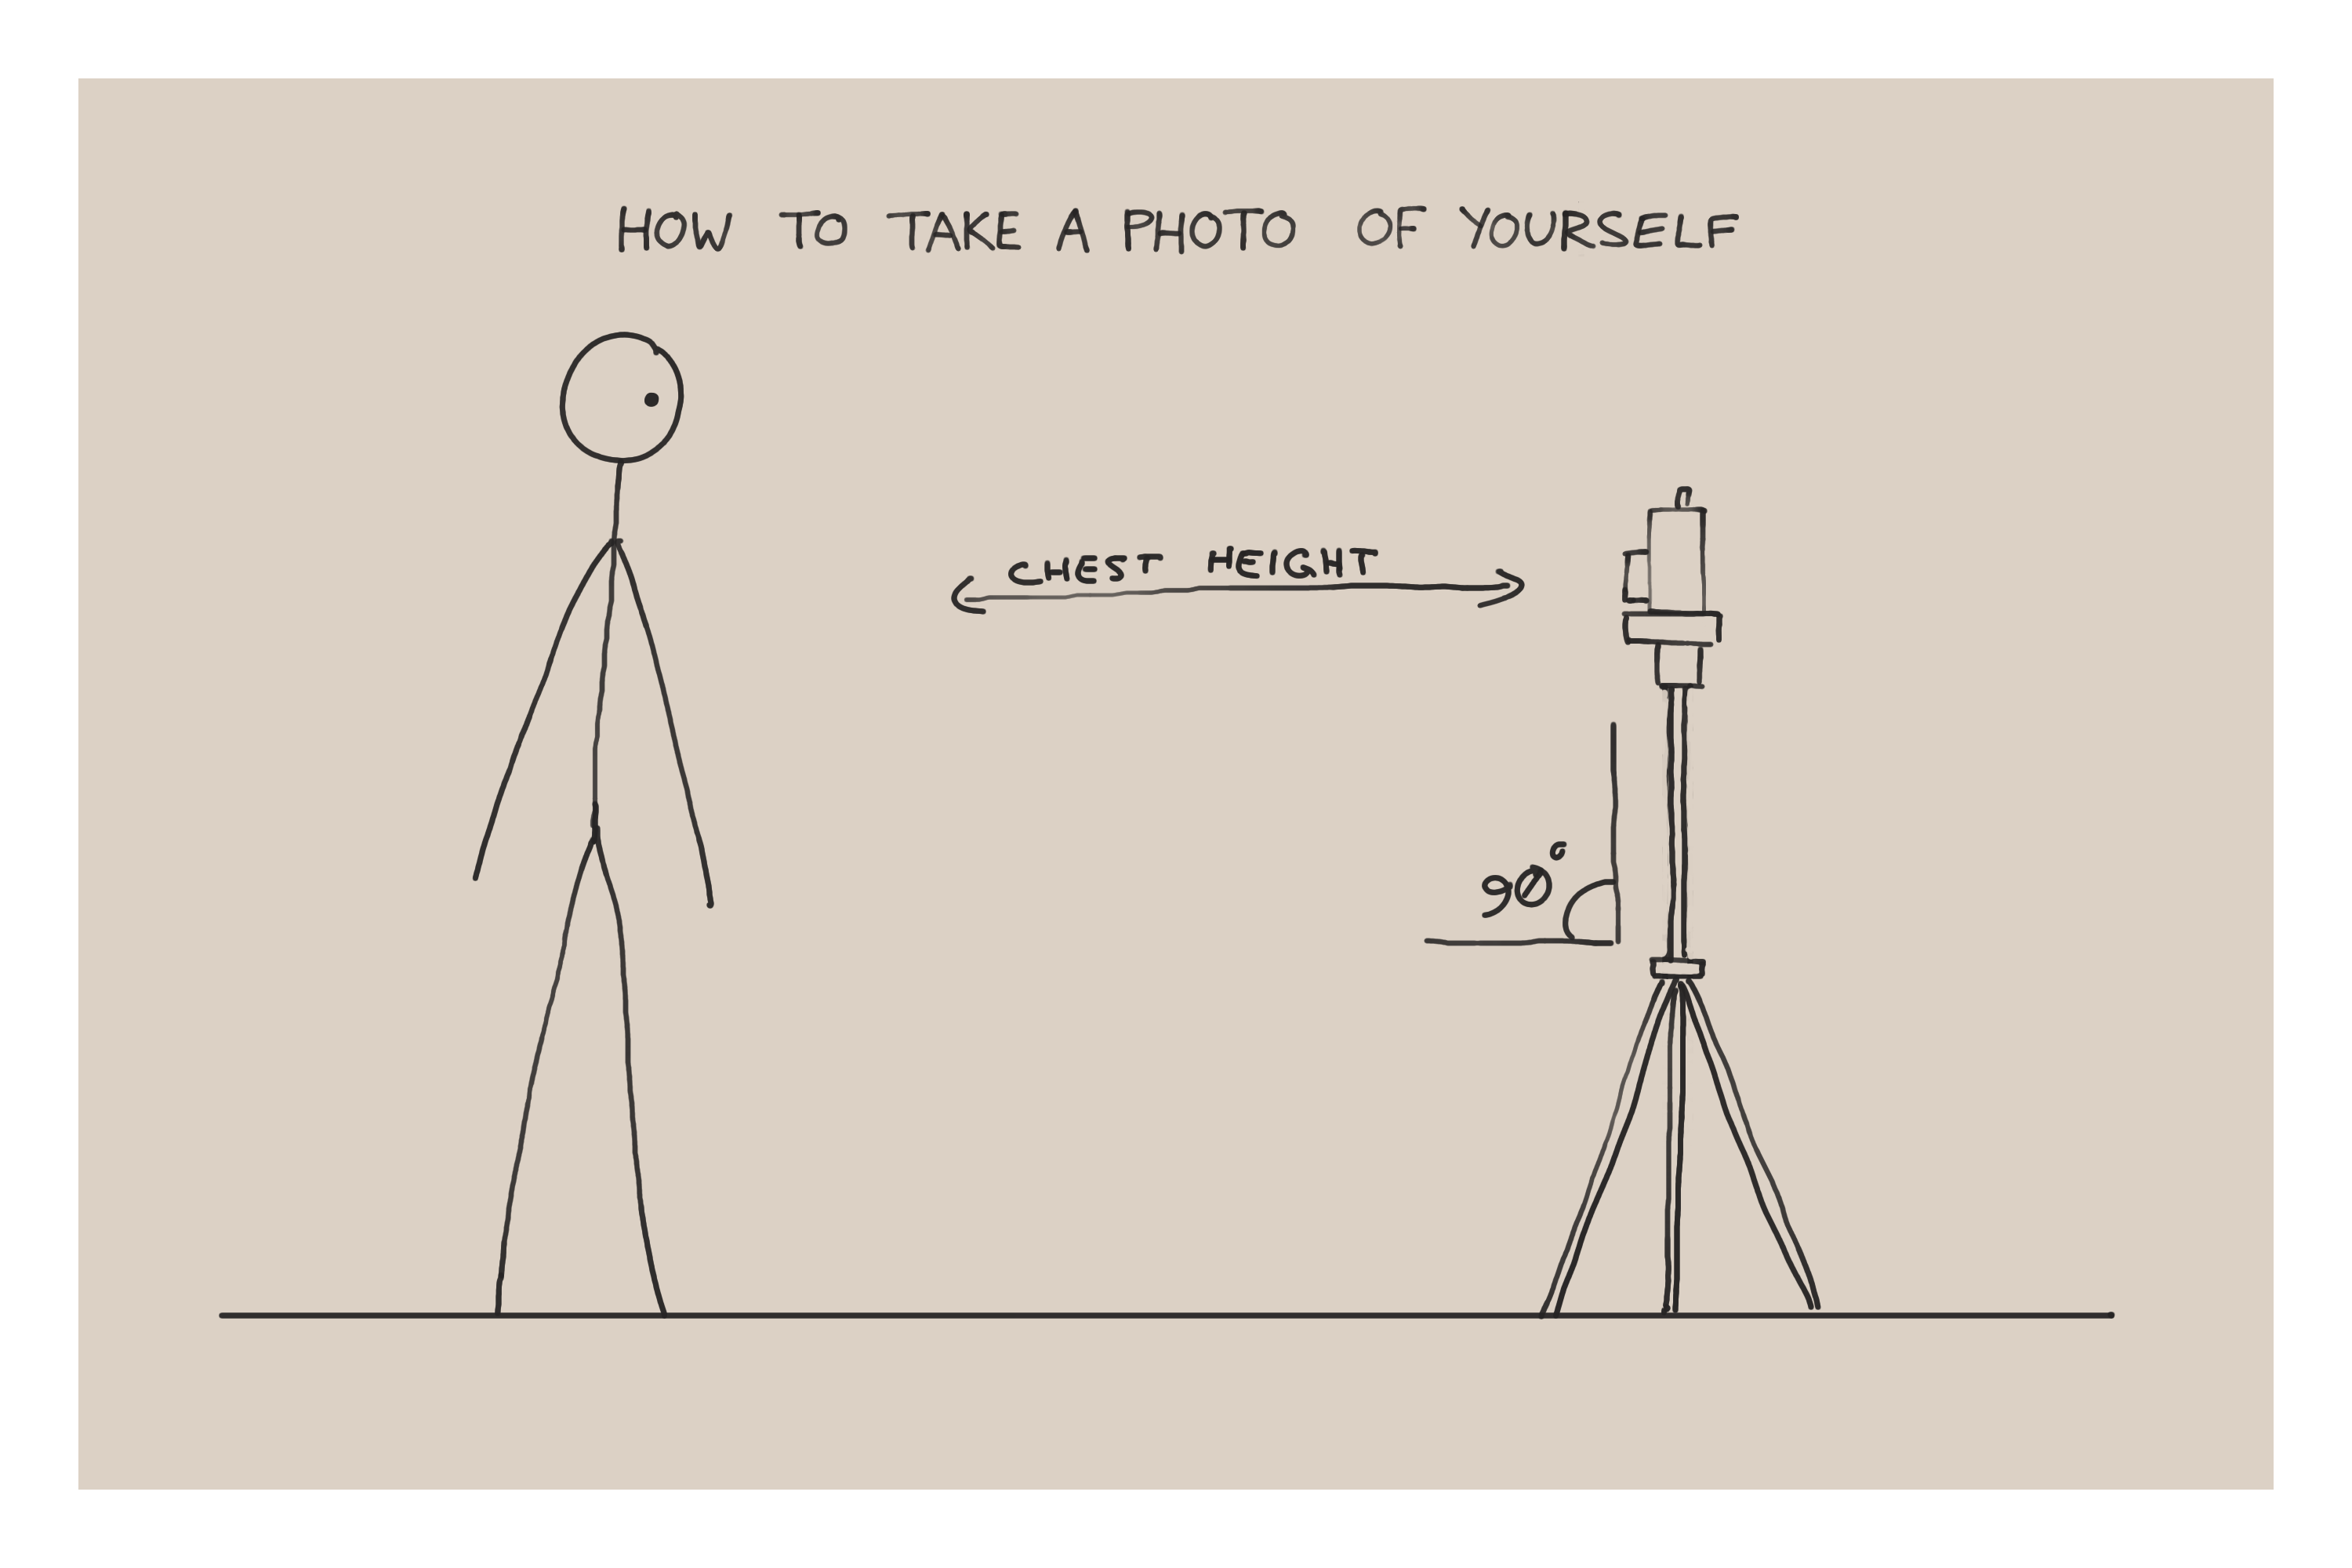 Make sure the camera is at chest height and a few feet away, so that you get an accurate picture of your proportions.